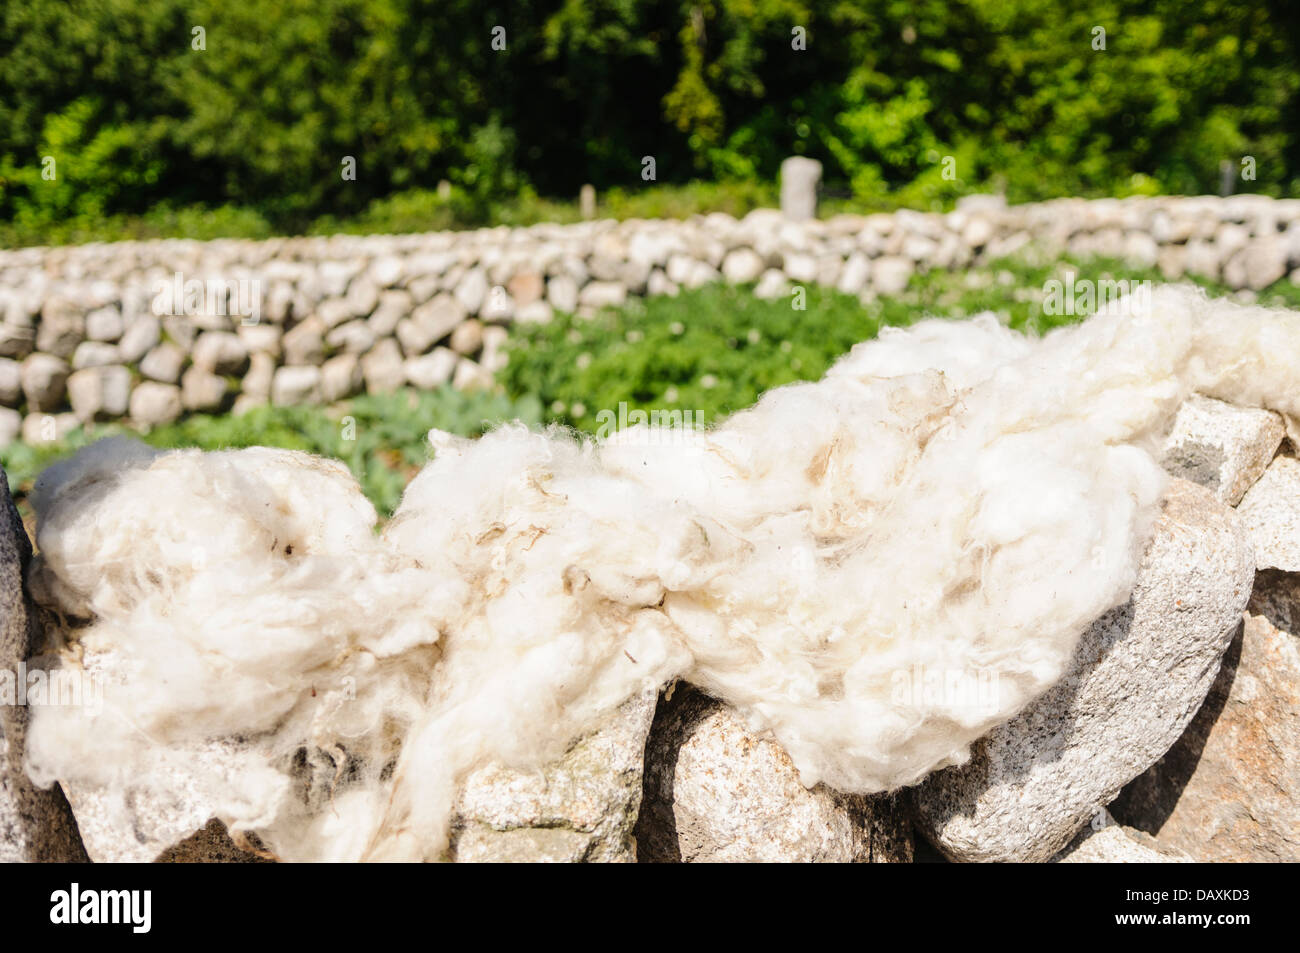 Sheep's fleece left to dry outside on a dry stone wall after being washed Stock Photo